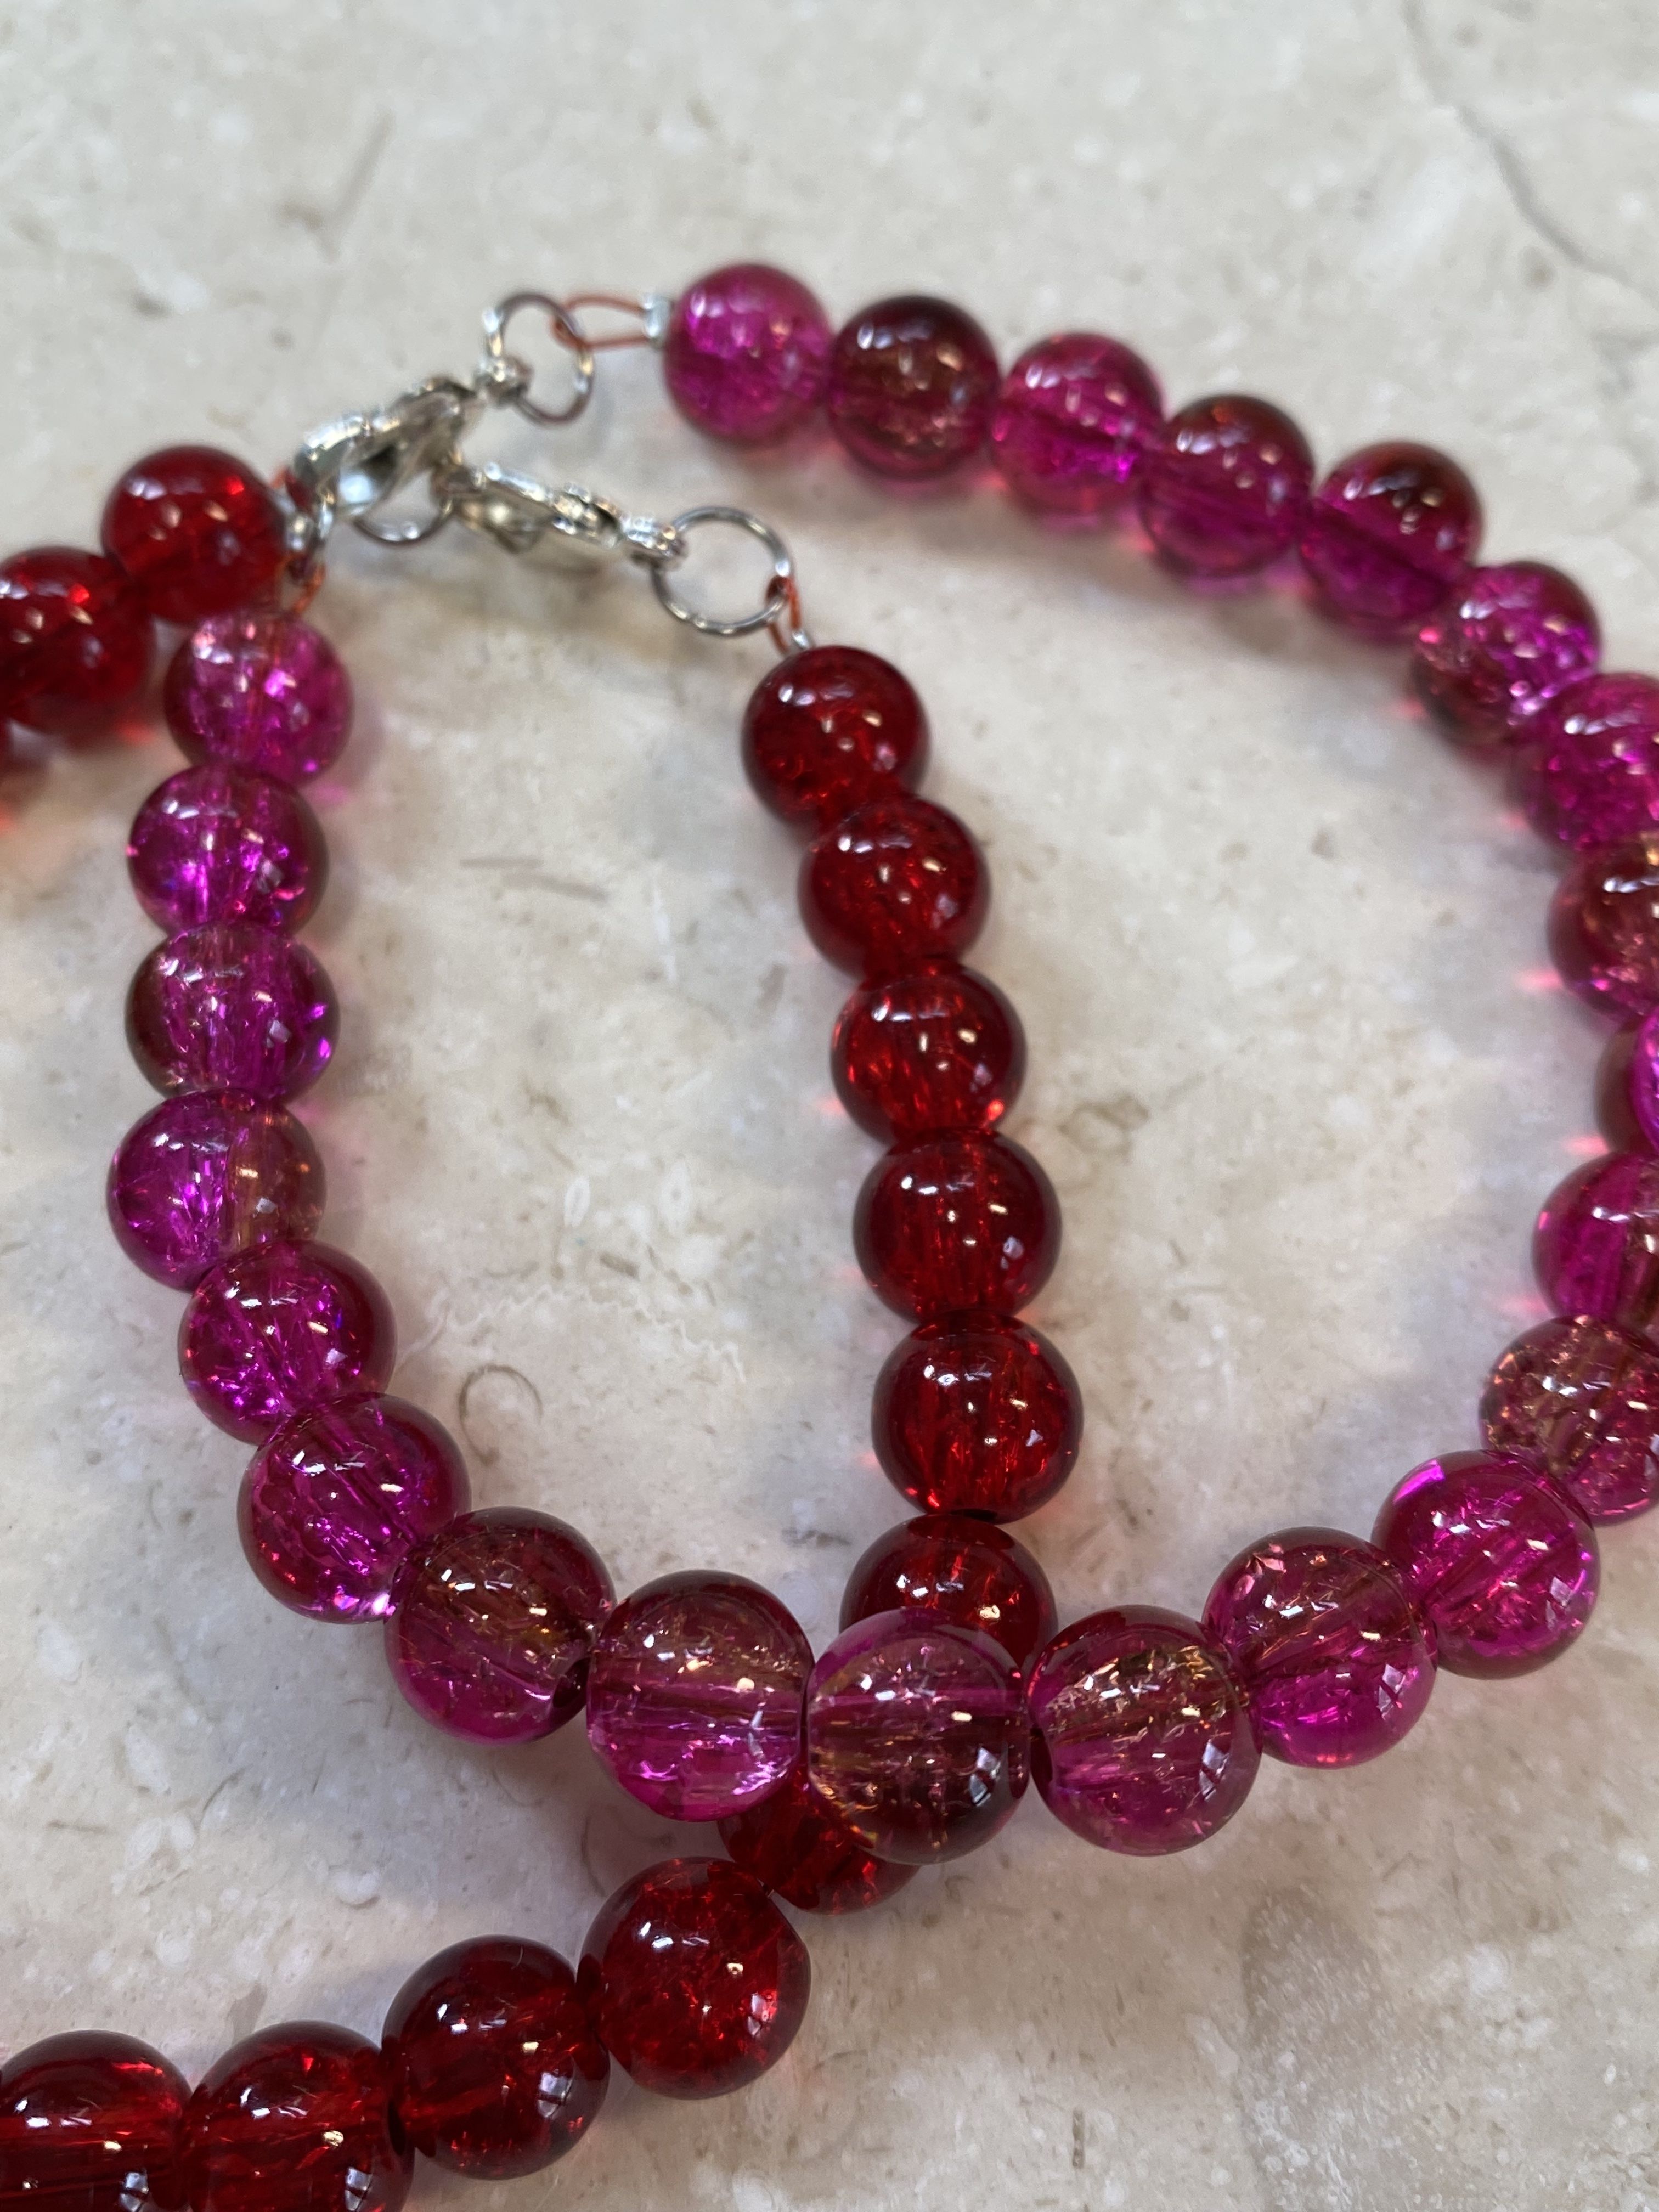 Set of 2 Stackable Glass Beaded Bracelet (Shades of Red) - Stackable Crackle Glass Beaded Bracelet - Handmade Glass Beaded Bracelet